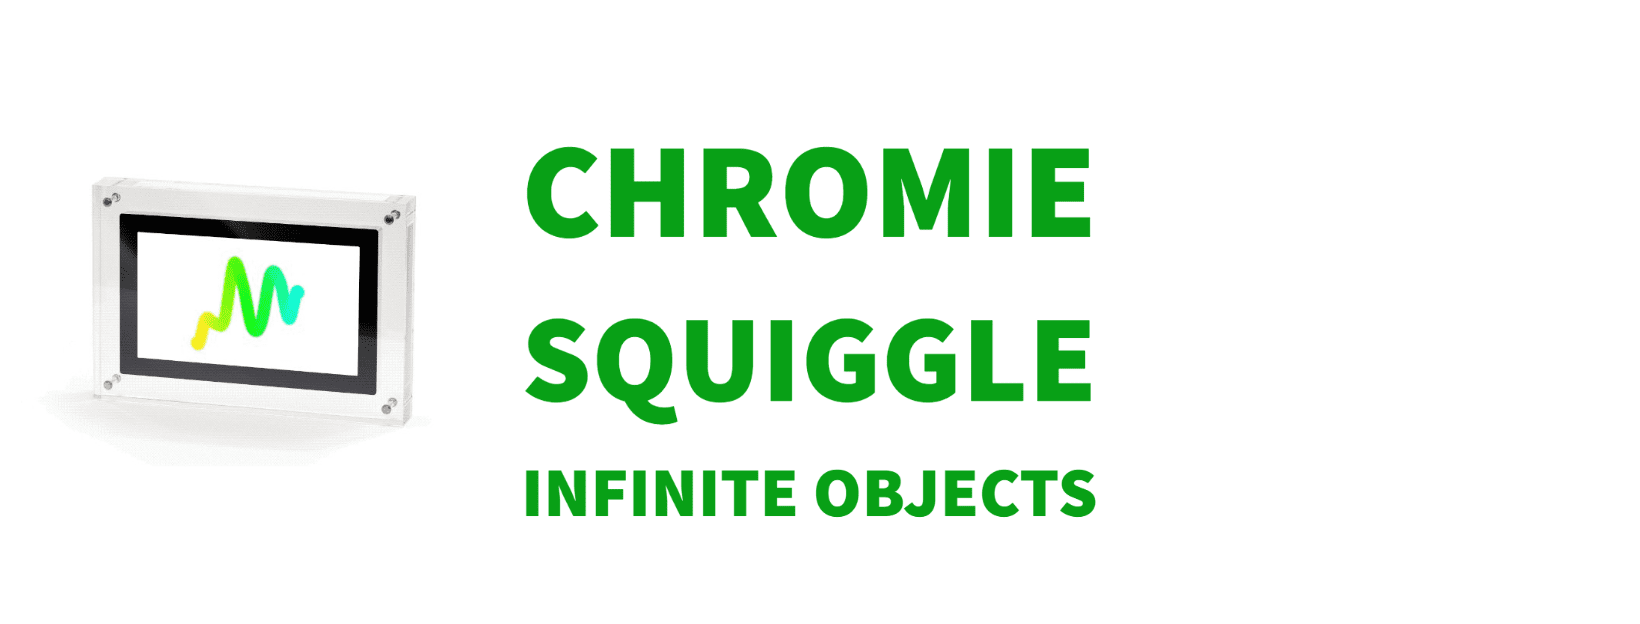 Chromie Squiggle Infinite Objects NFT Prints are finally here